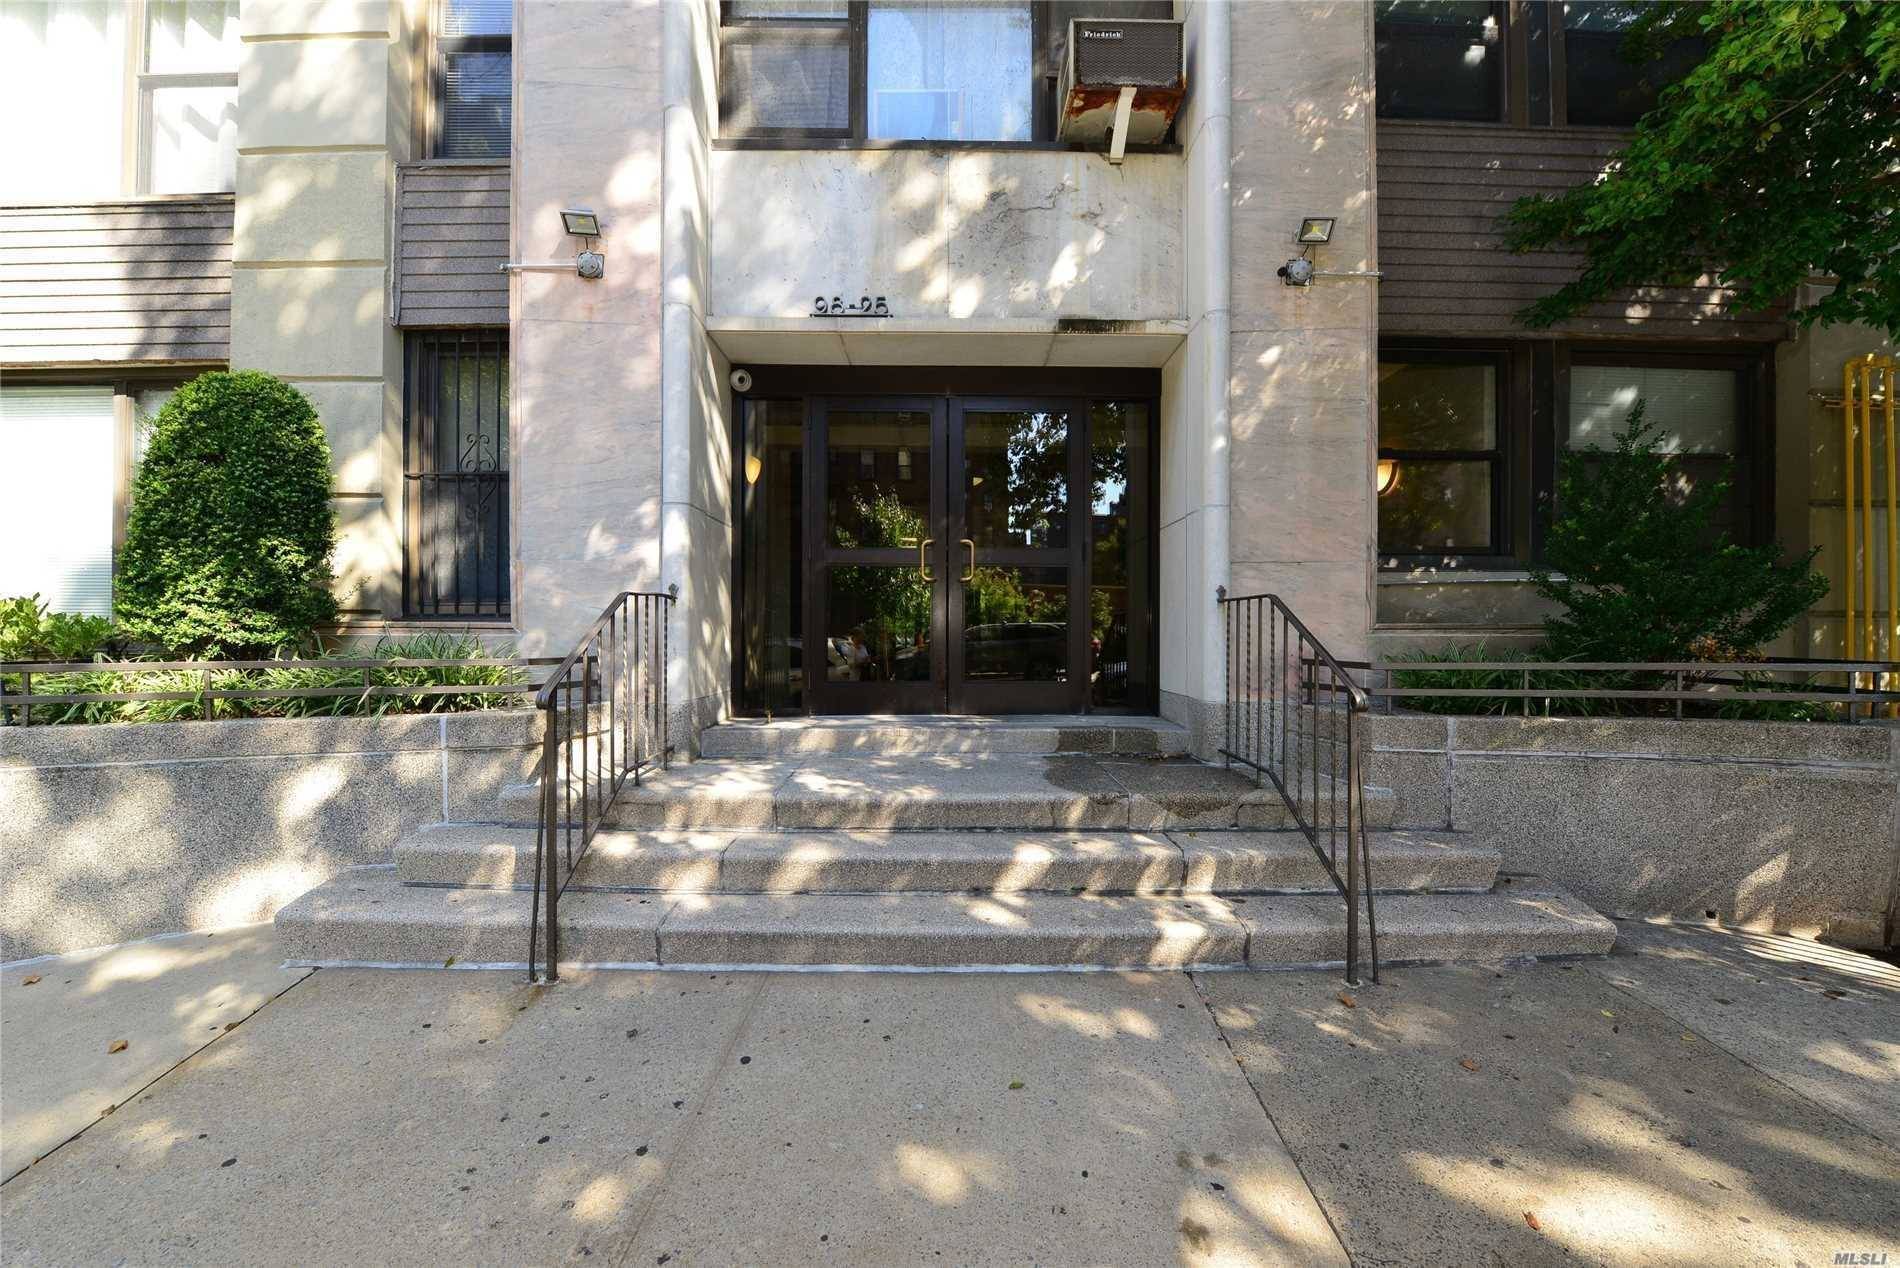 64th 2 BR House Forest Hills LIC / Queens